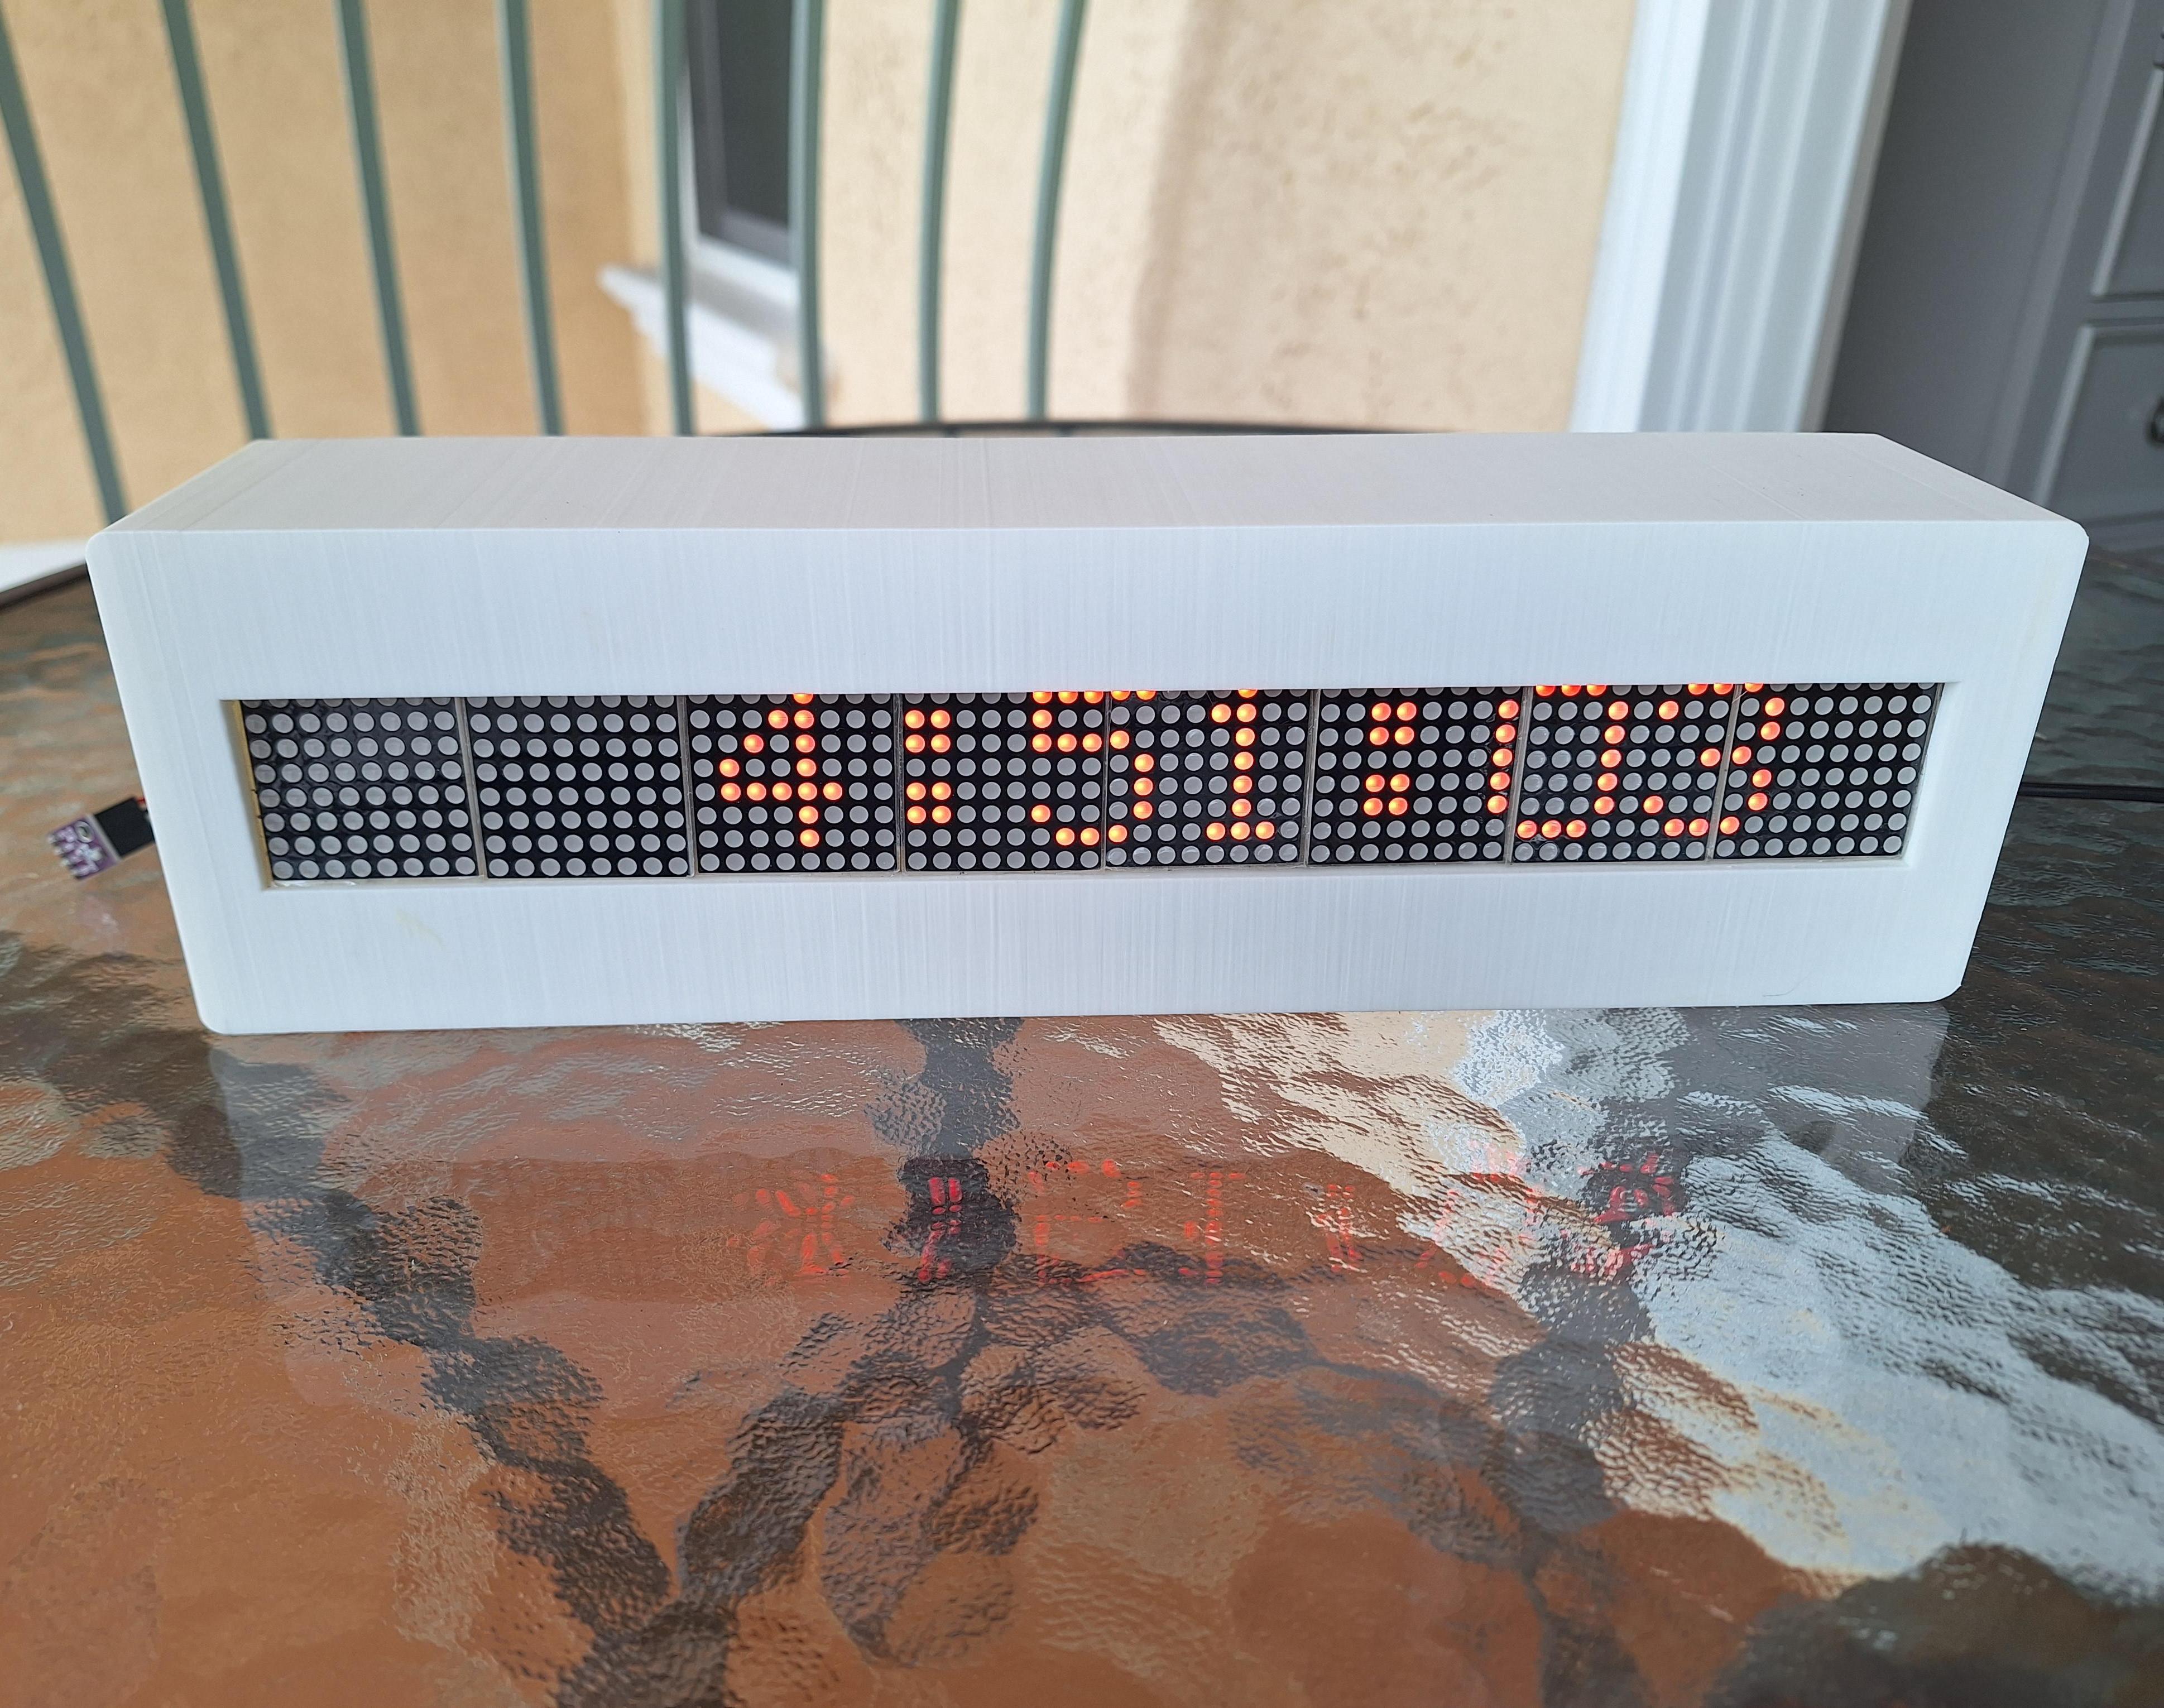 A Scrolling Digital Clock and Weather Station